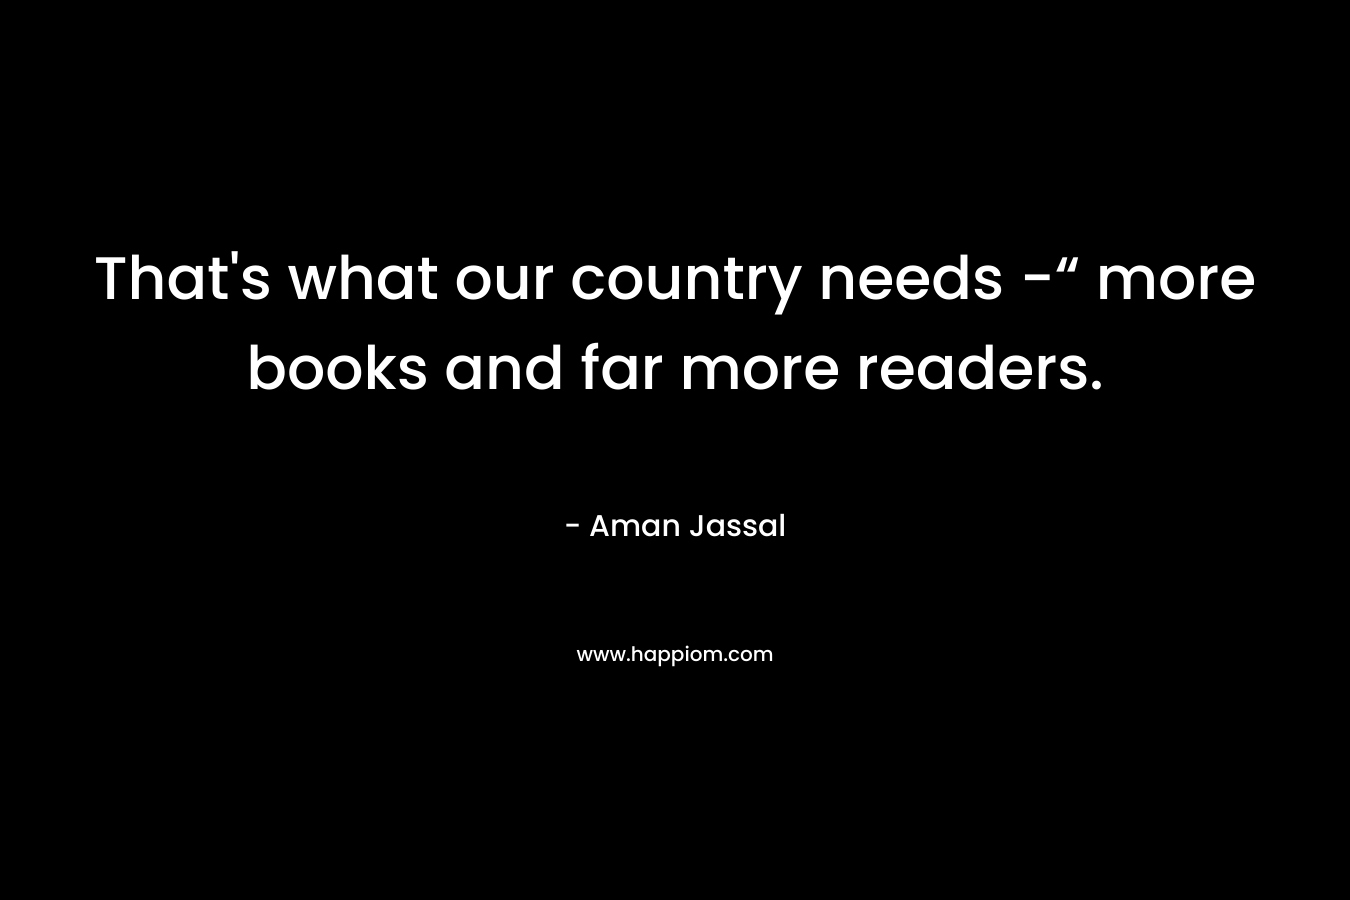 That’s what our country needs -“ more books and far more readers. – Aman Jassal